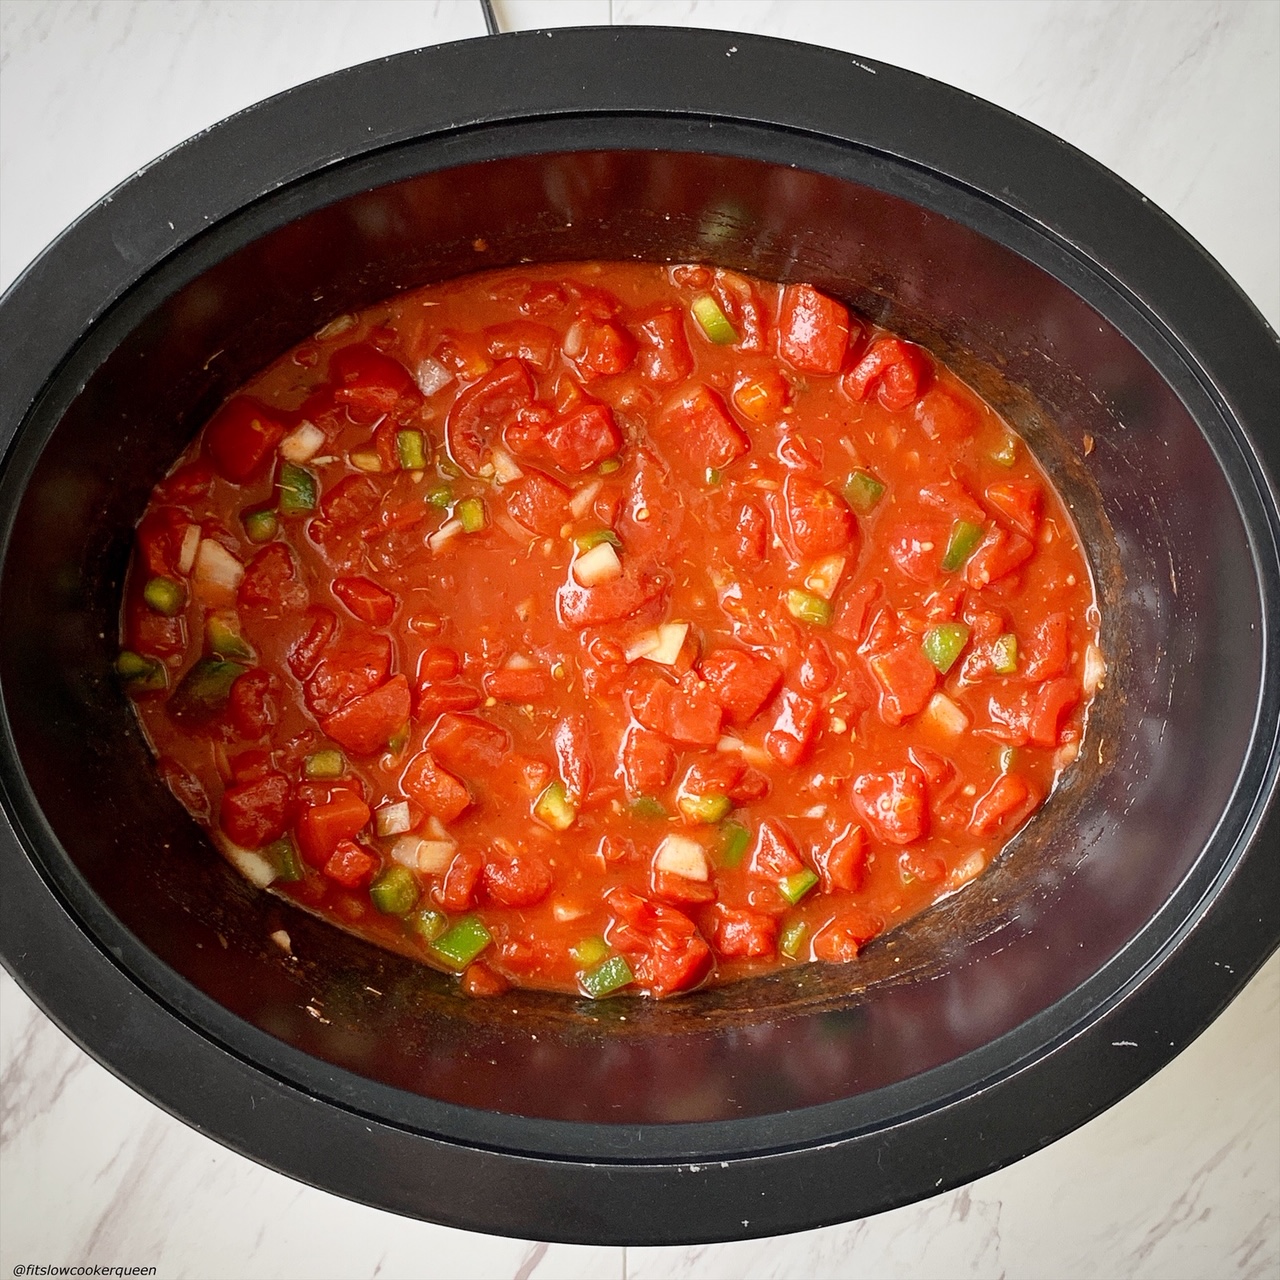 tomatoes, bell peppers, onions, and seasonings in the slow cooker